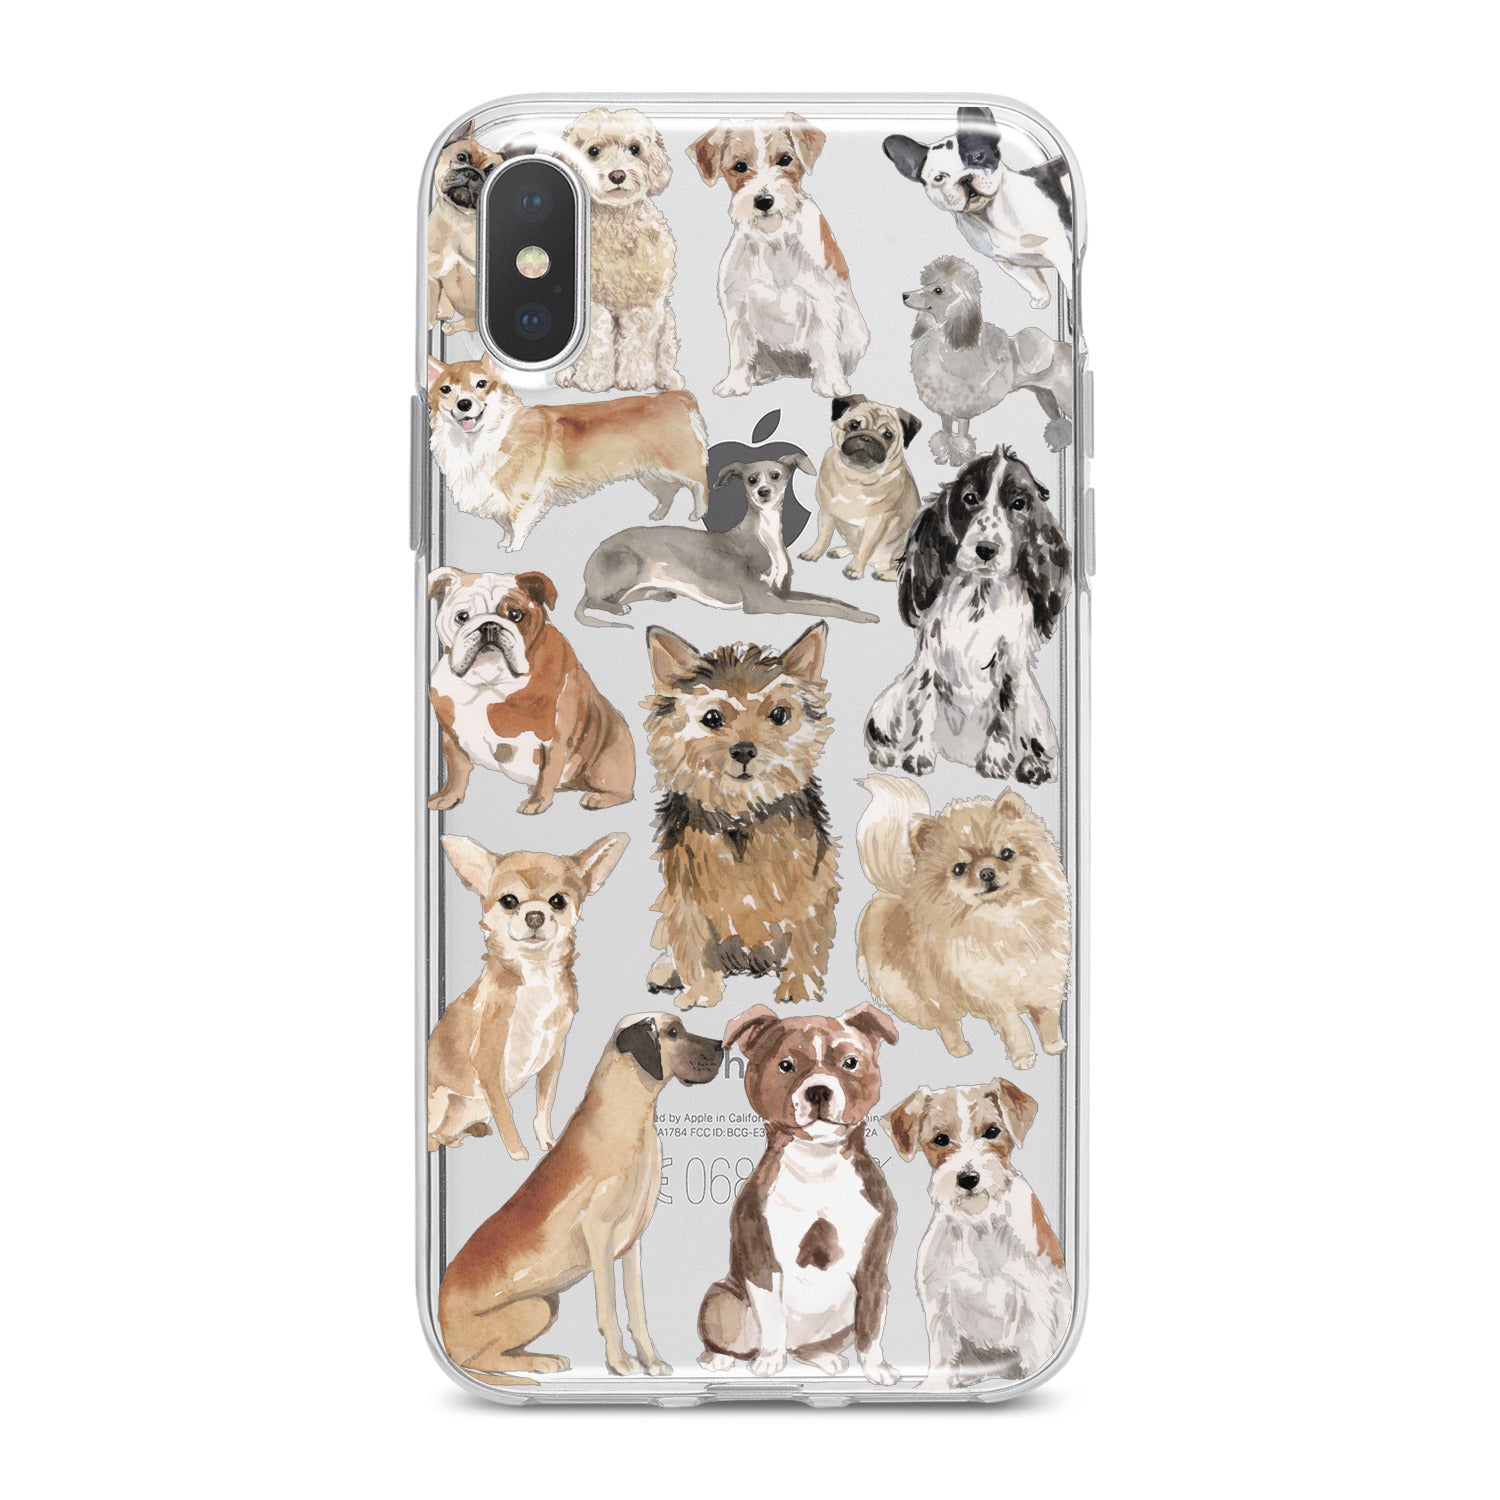 Lex Altern Cute Dogs Phone Case for your iPhone & Android phone.